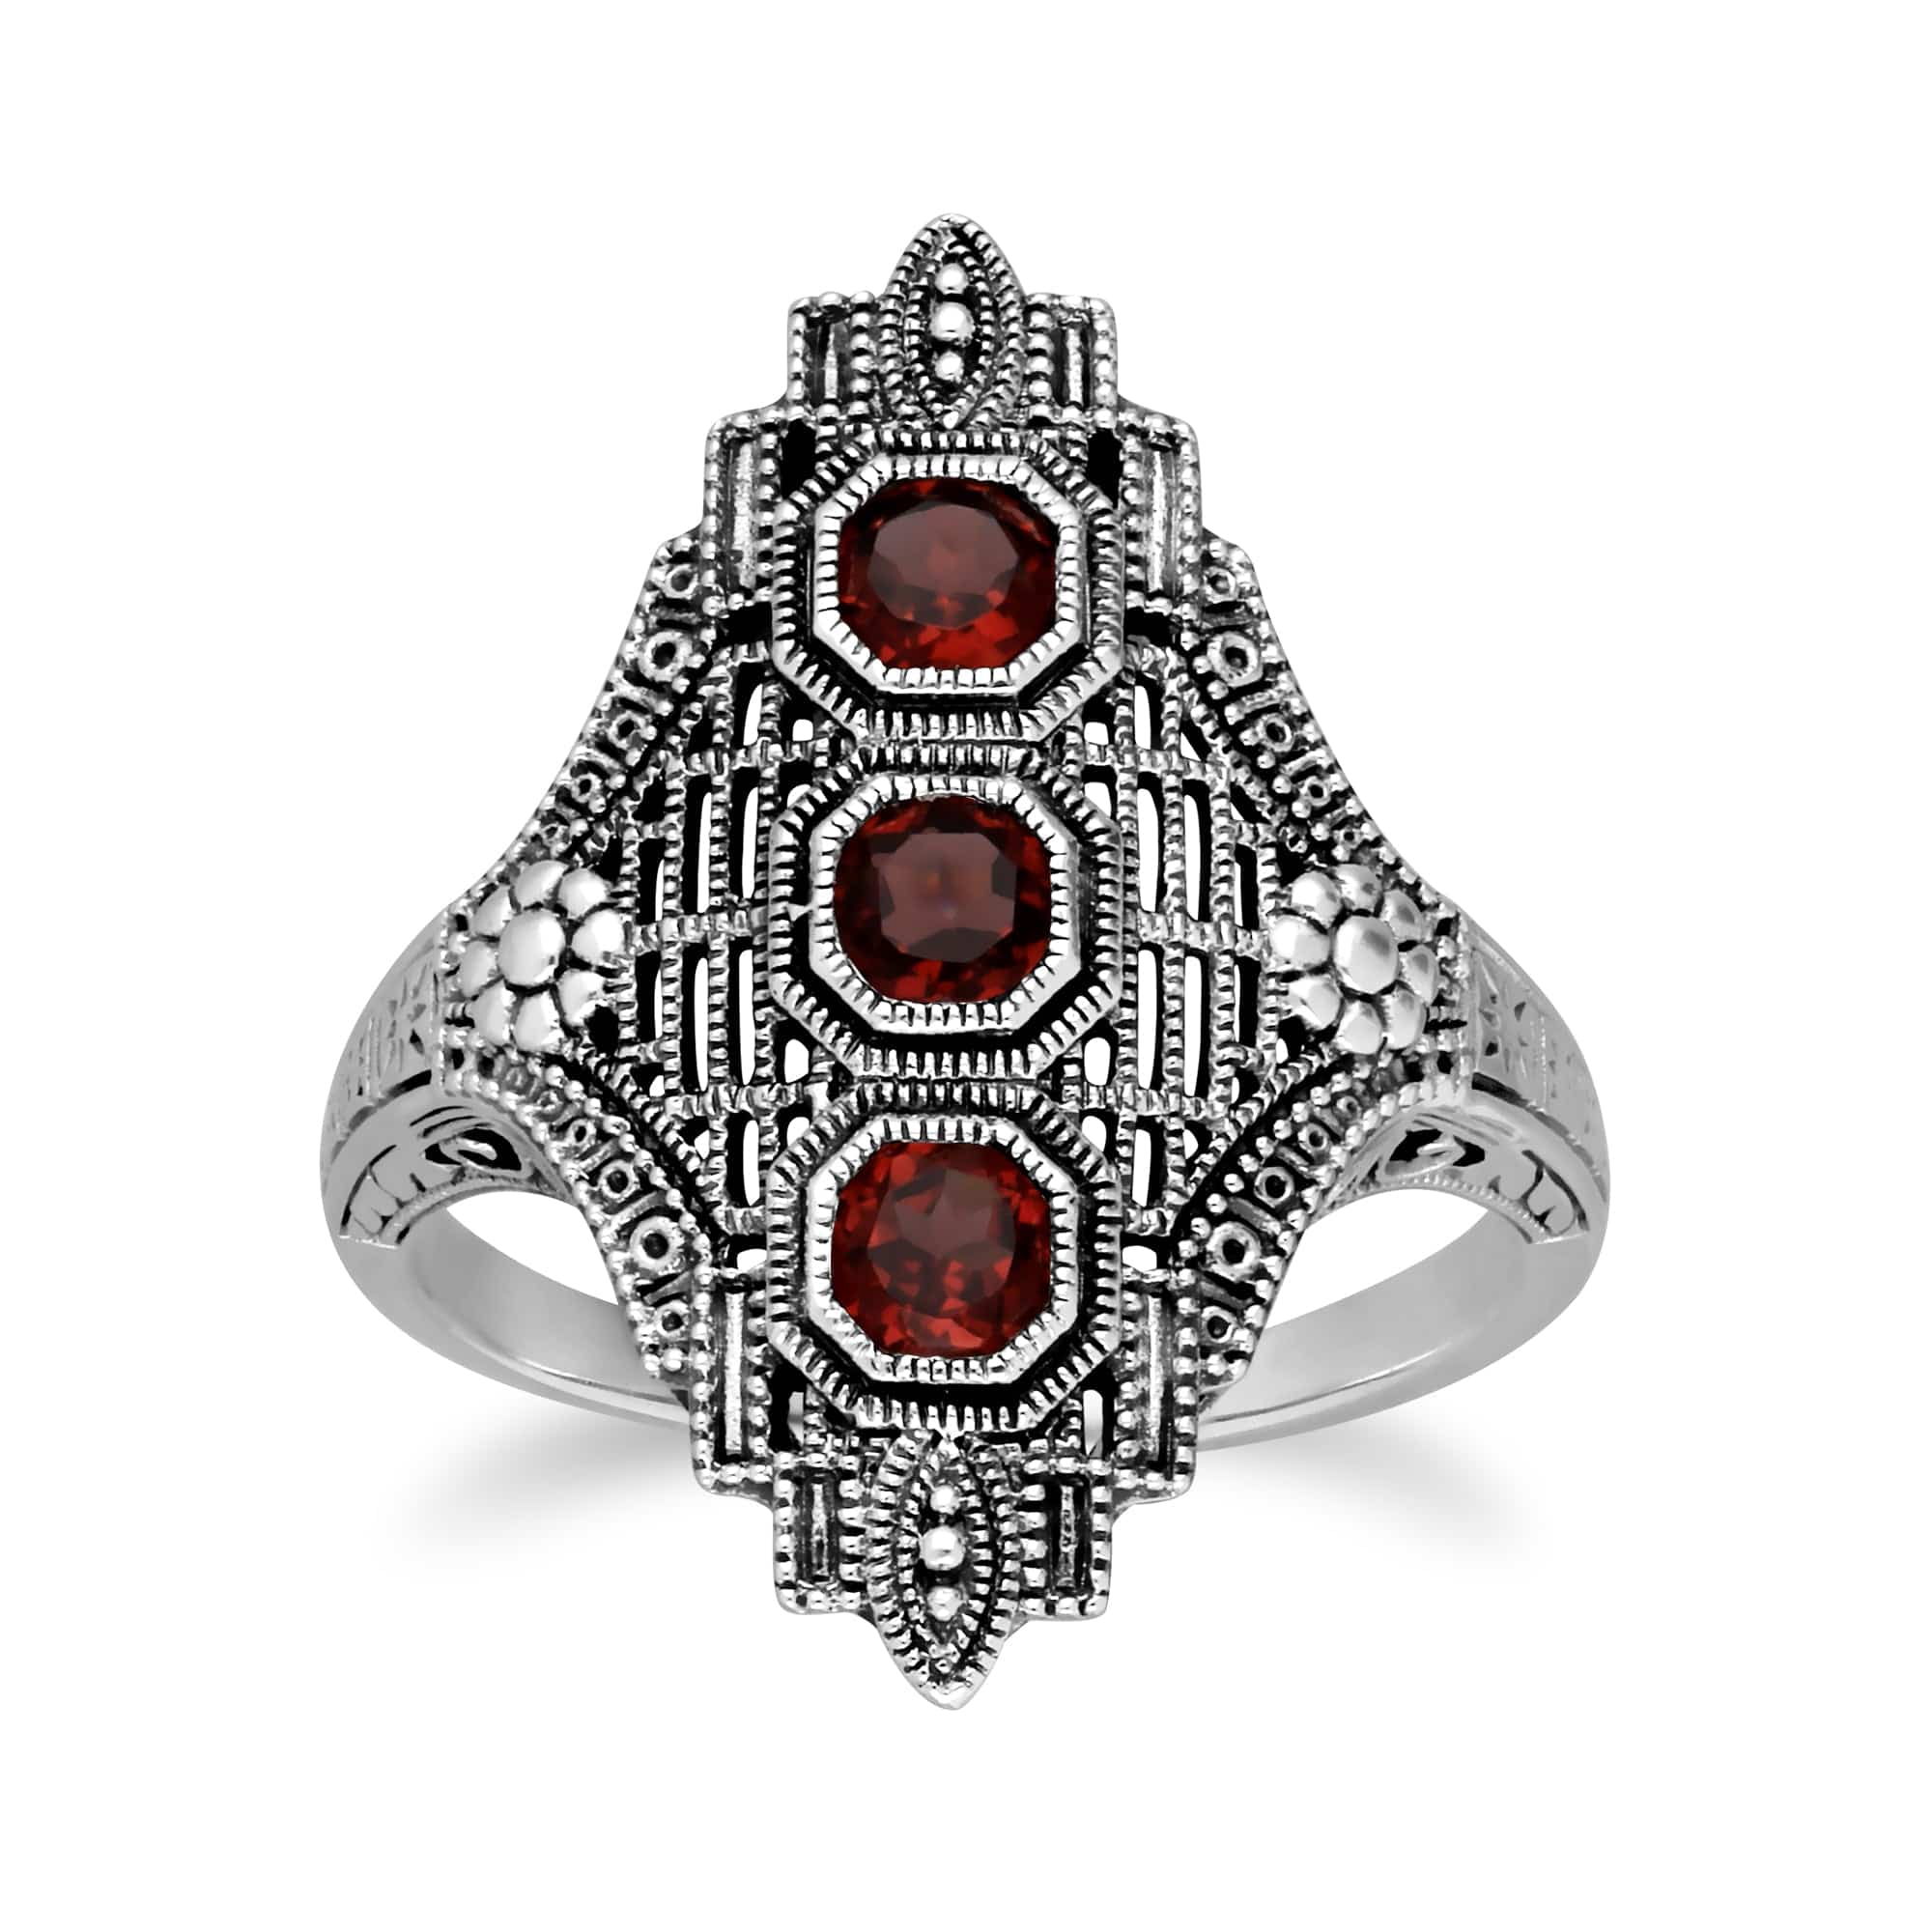 241R210501925 Art Nouveau Style Octagon Garnet Three Stone Filigree Statement Ring in 925 Sterling Silver 1